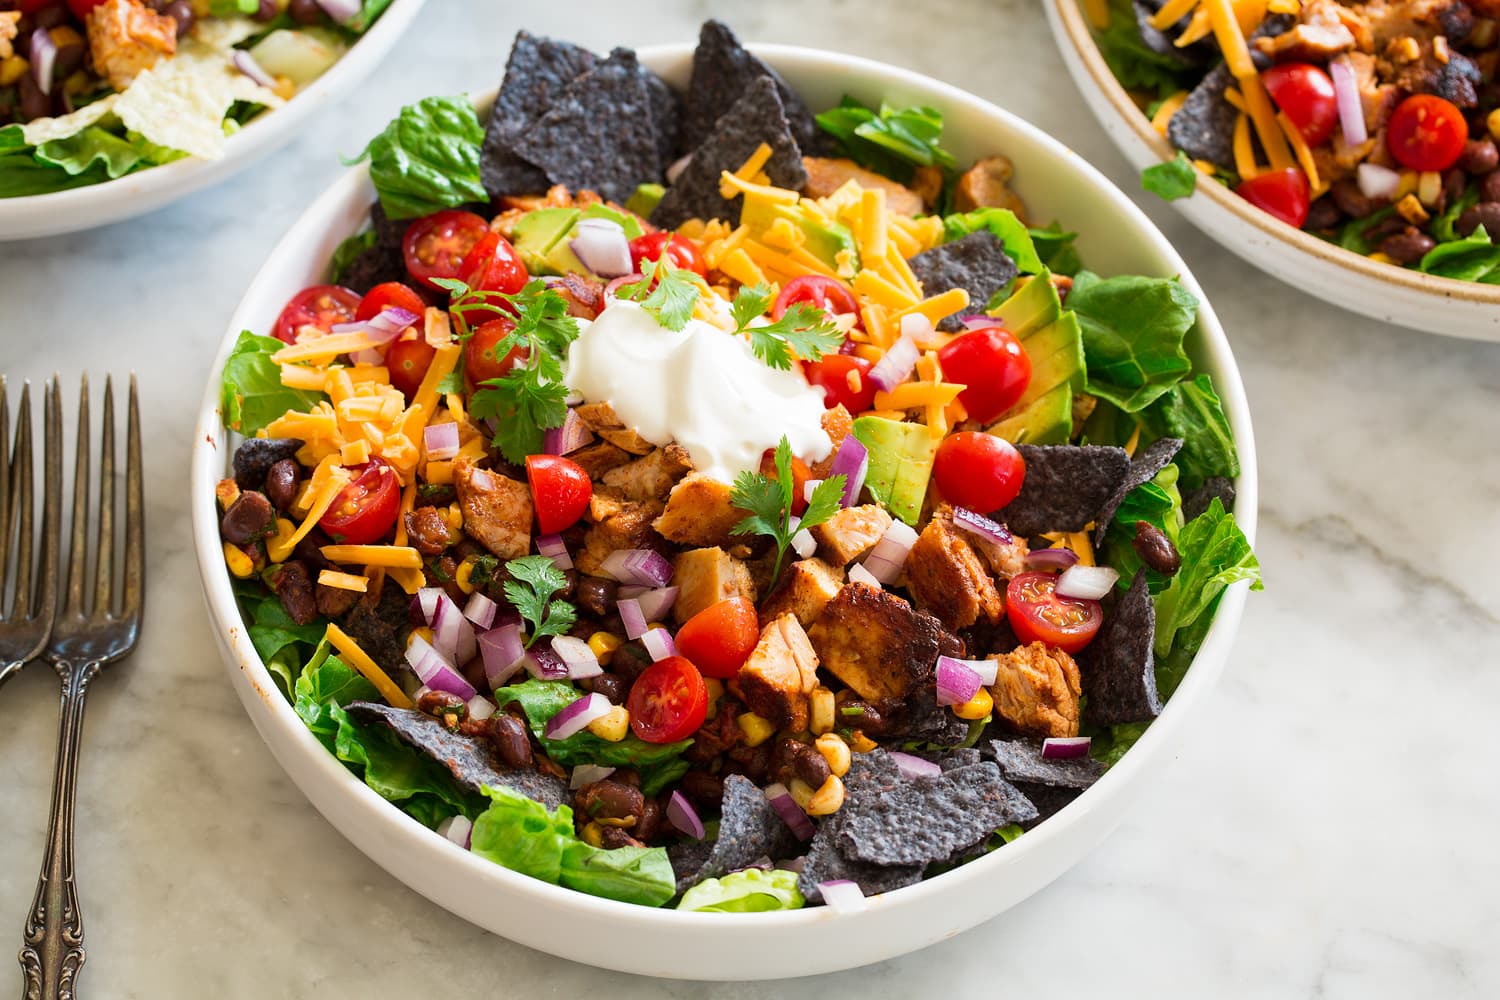 Layered taco salad with all prepared ingredients.